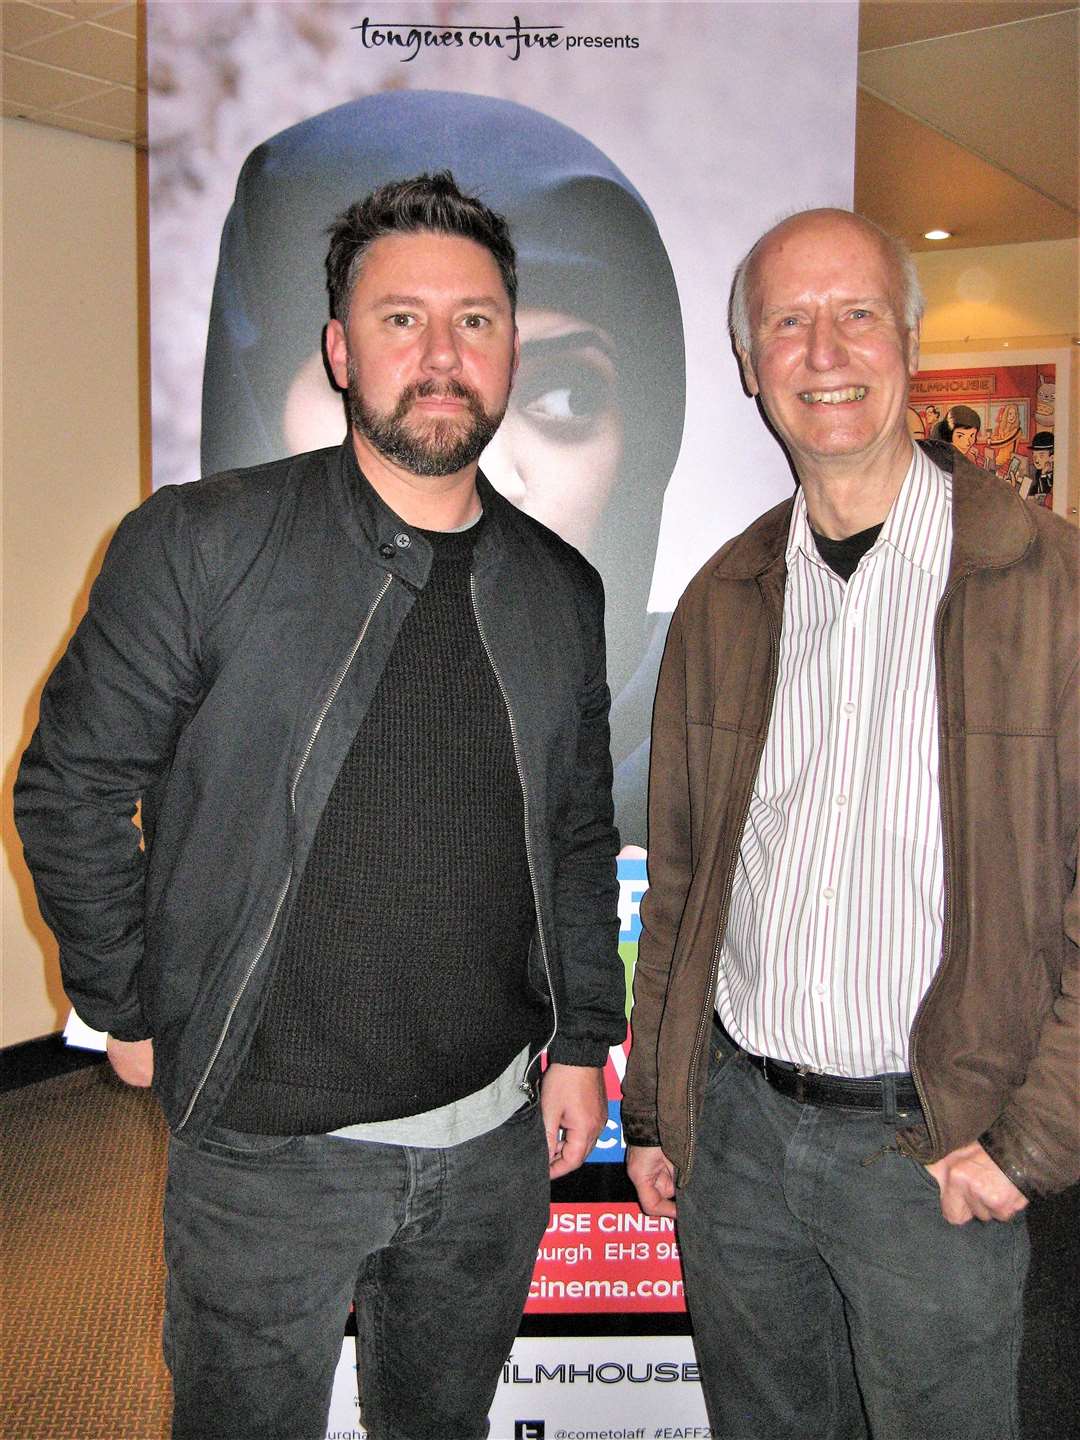 John Sawkins with Chris Robb at the Filmhouse in Edinburgh at the launch of the film Utopia.